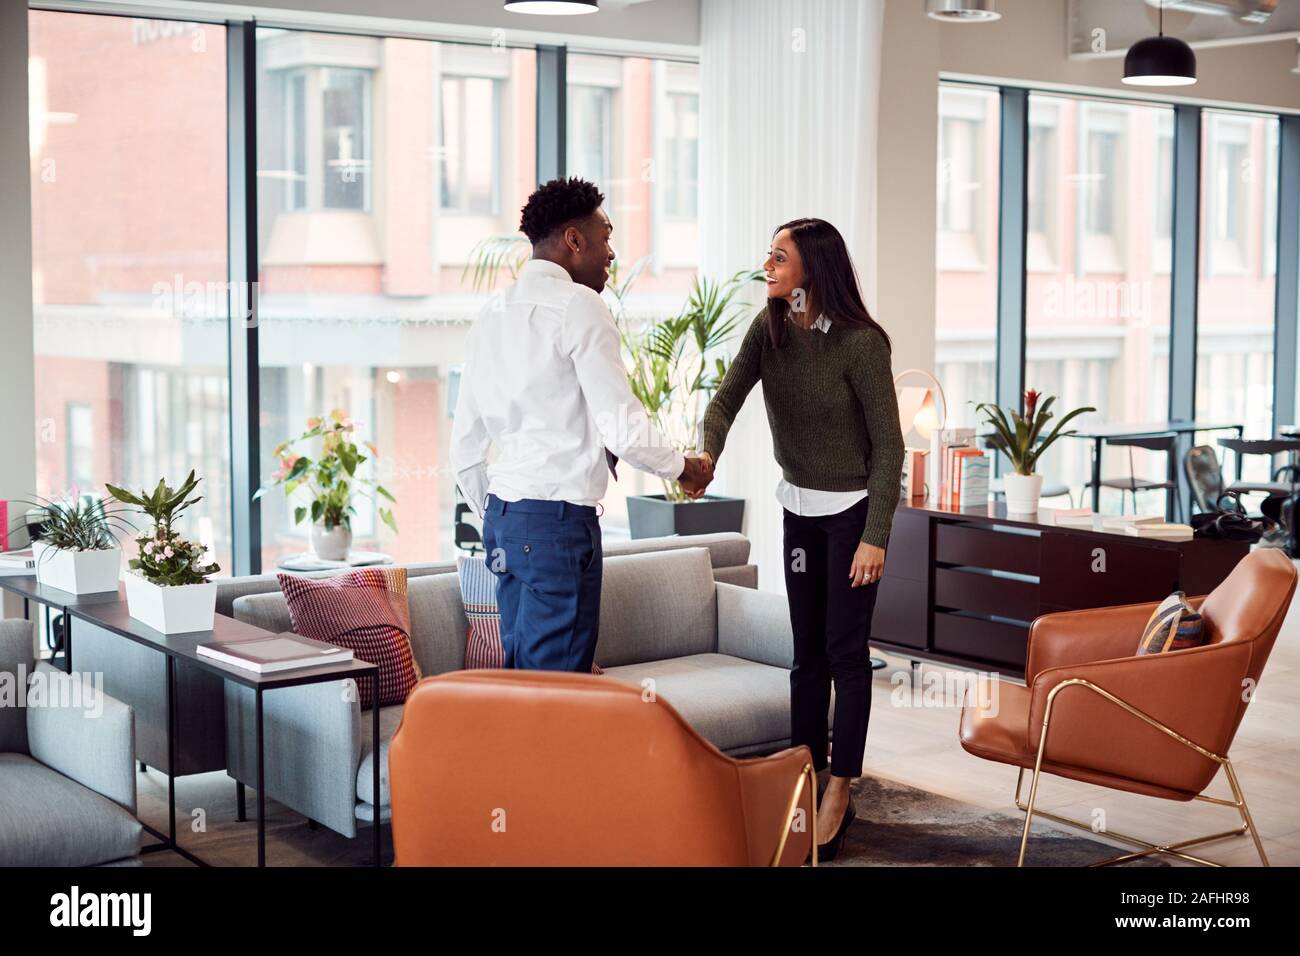 Businesswoman Shaking Hands With Male Interview Candidate In Seating Area Of Modern Office Stock Photo